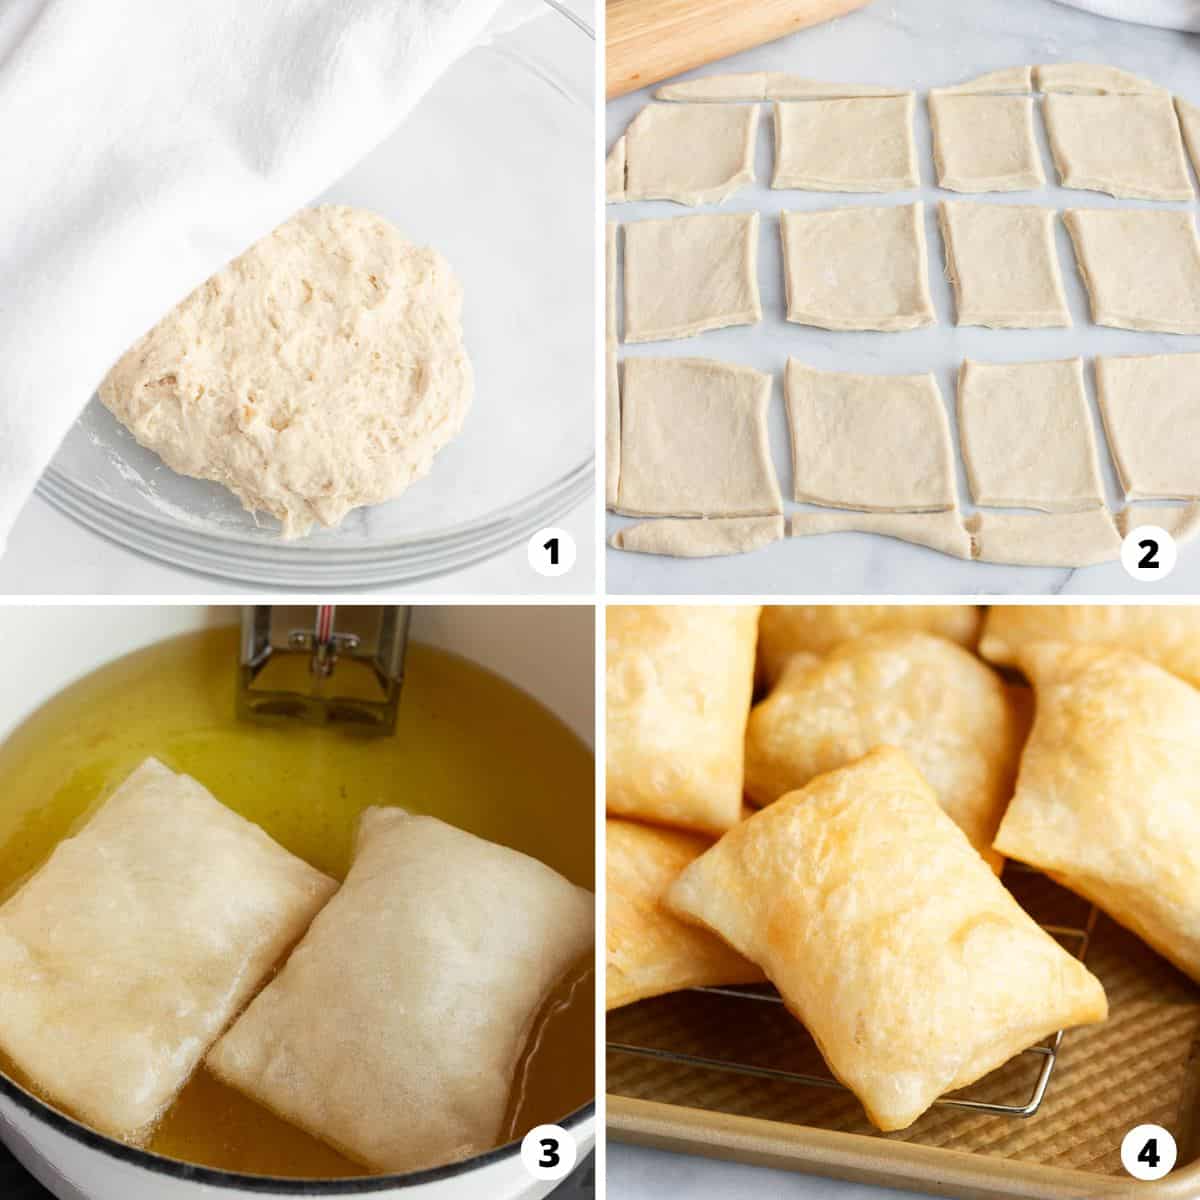 Showing how to make sopapillas in a 4 step collage.